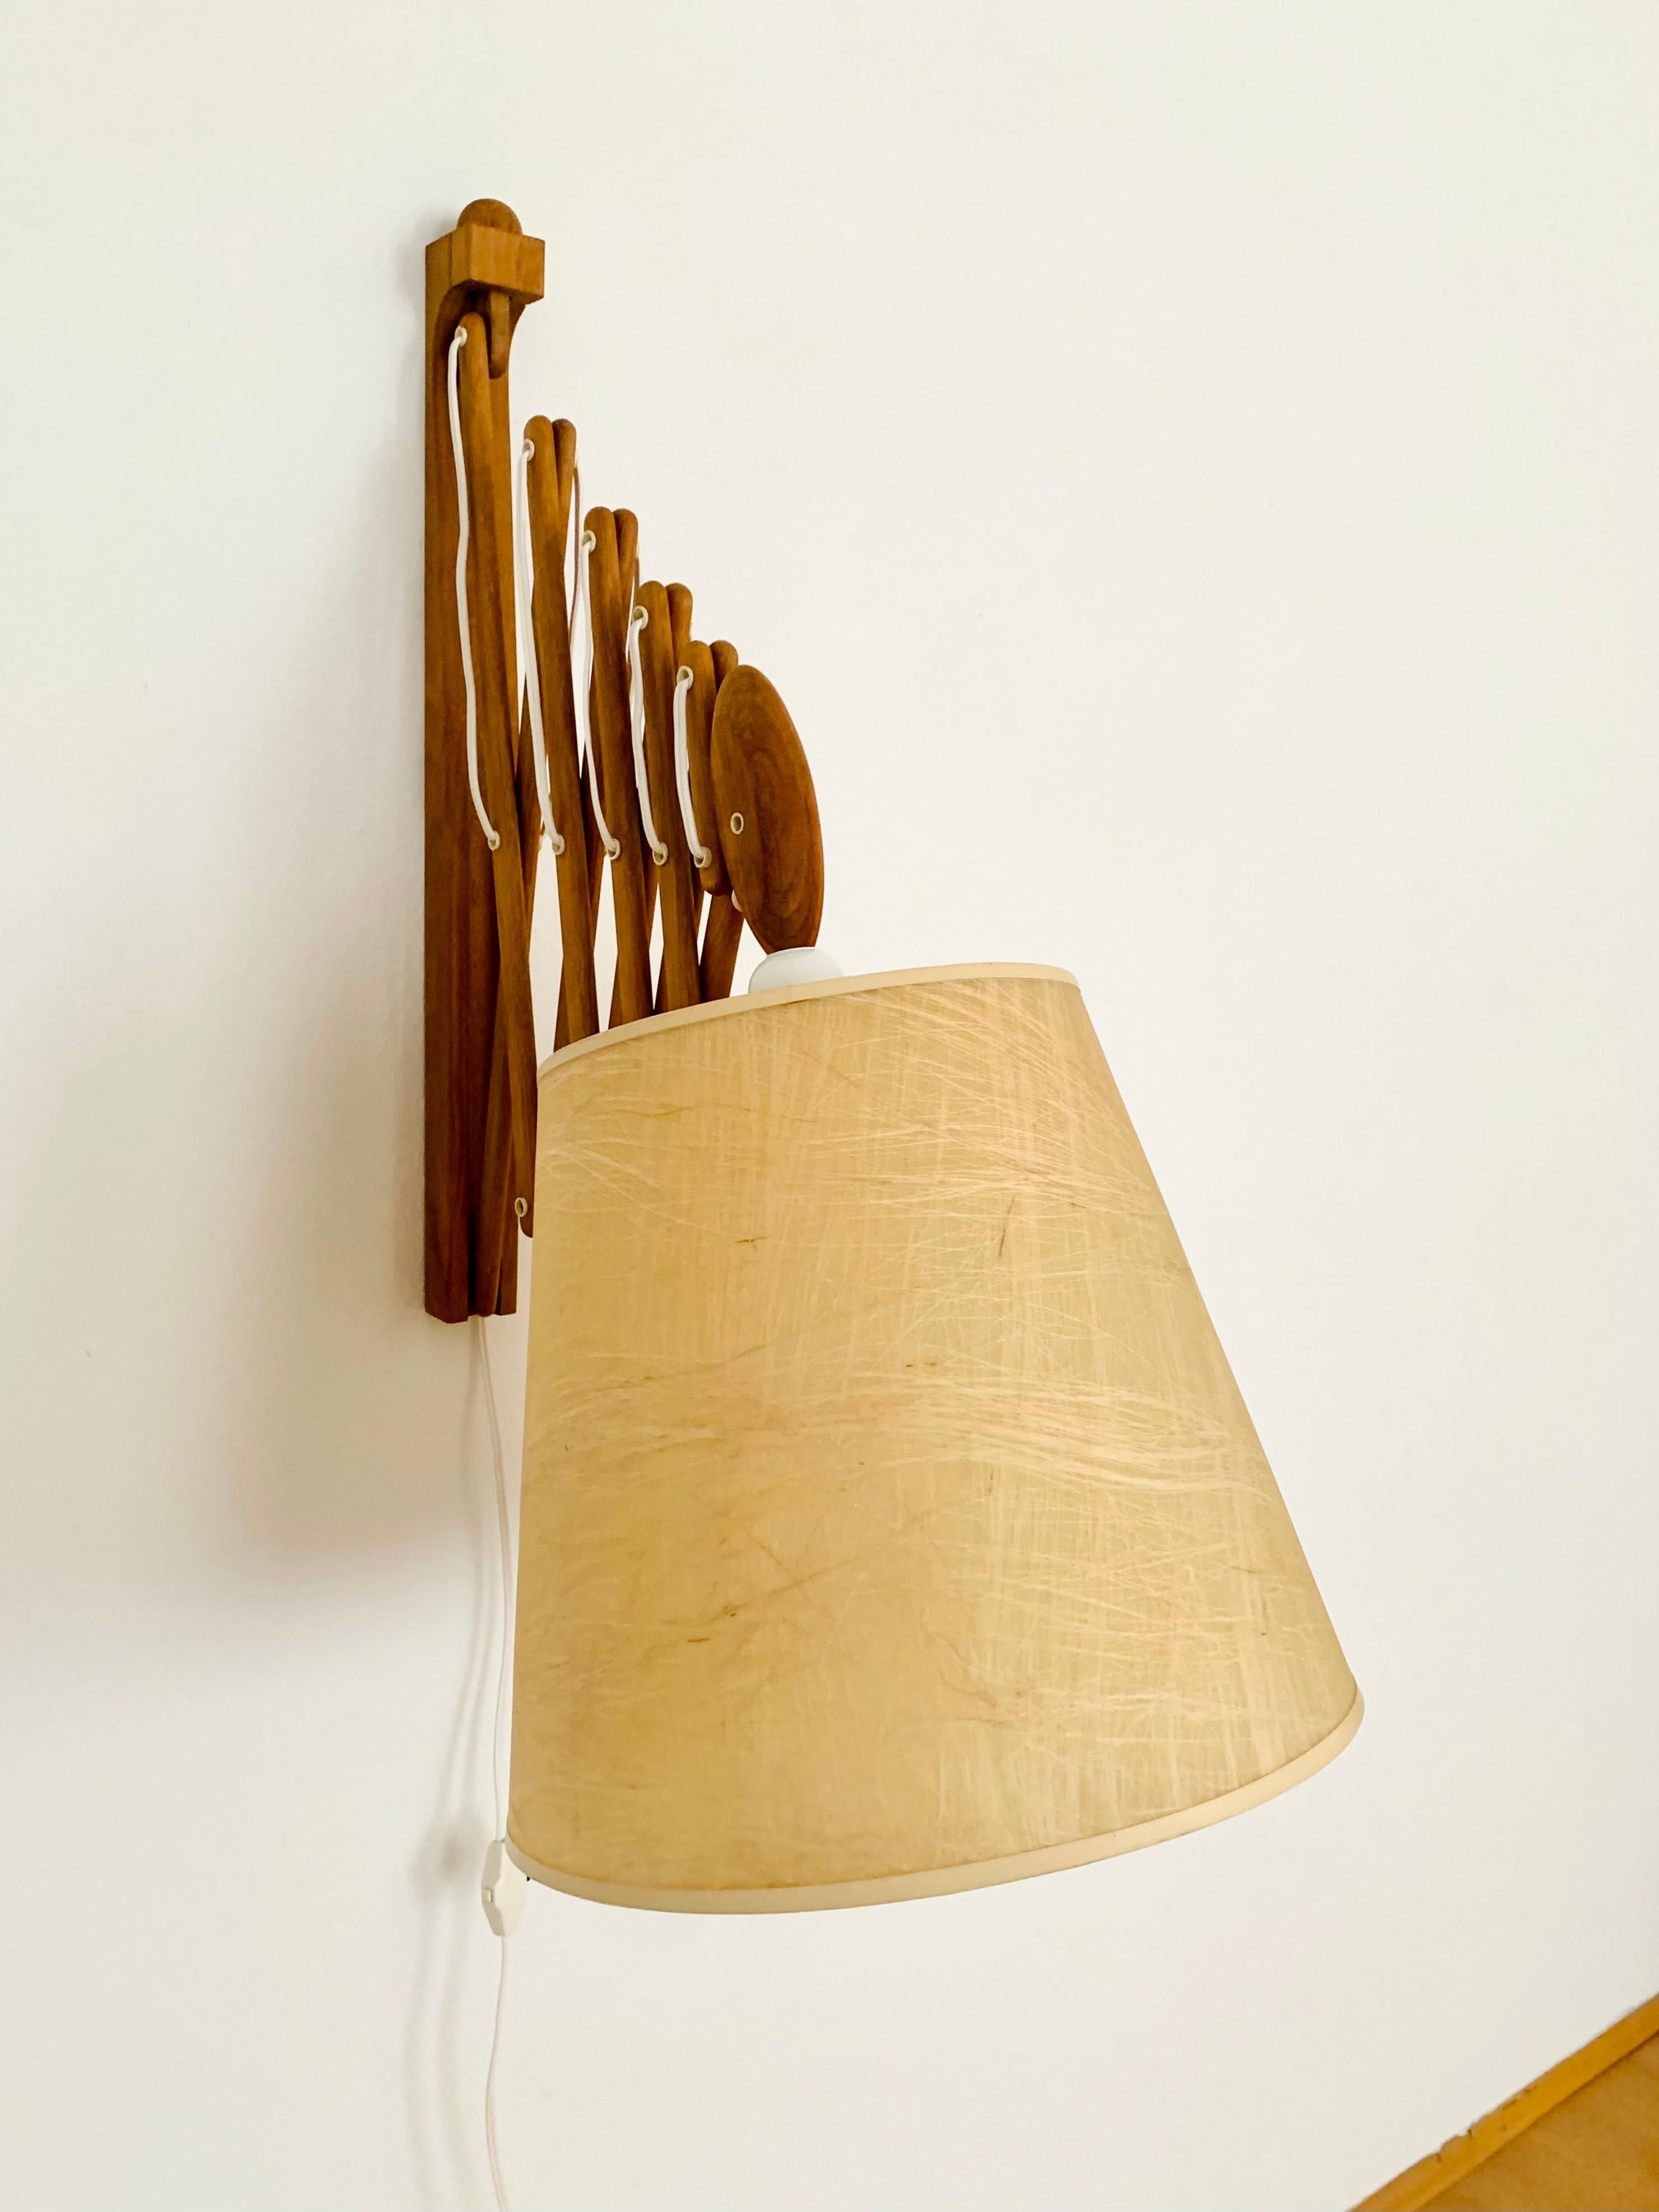 Wonderful large Danish wall lamp from the 1960s.
Exceptional design with a fantastically cozy look.
Very nice swiveling and extendable oak arm.
The lampshade creates a very cozy atmosphere.

Manufacturer: Le Klint

Condition:

Very good vintage